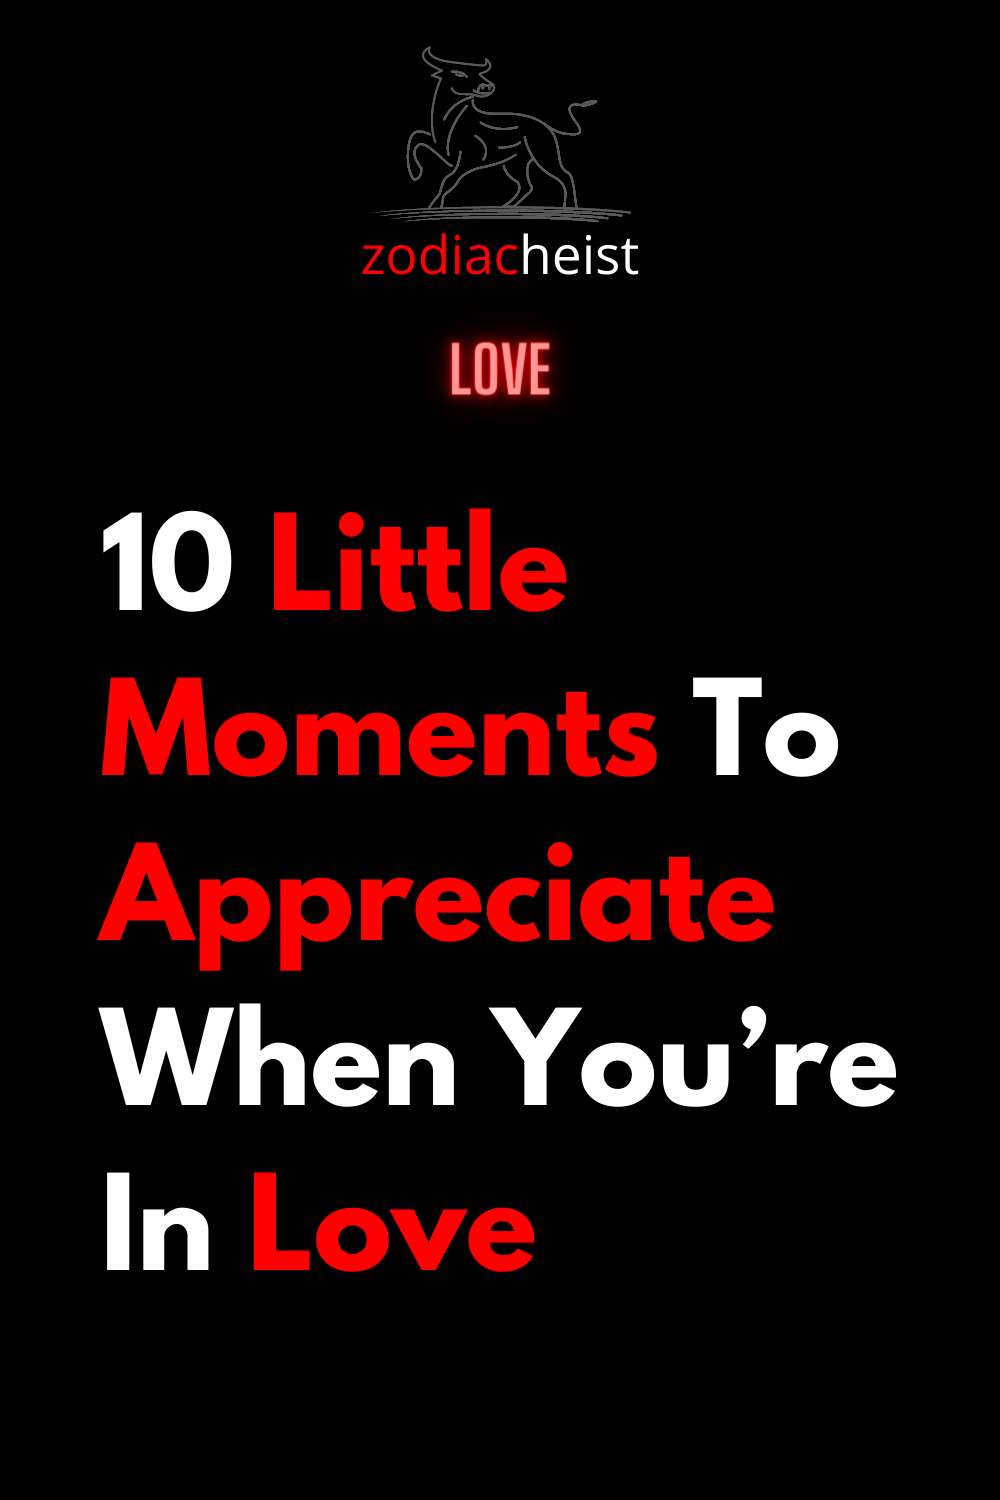 10 Little Moments To Appreciate When You’re In Love